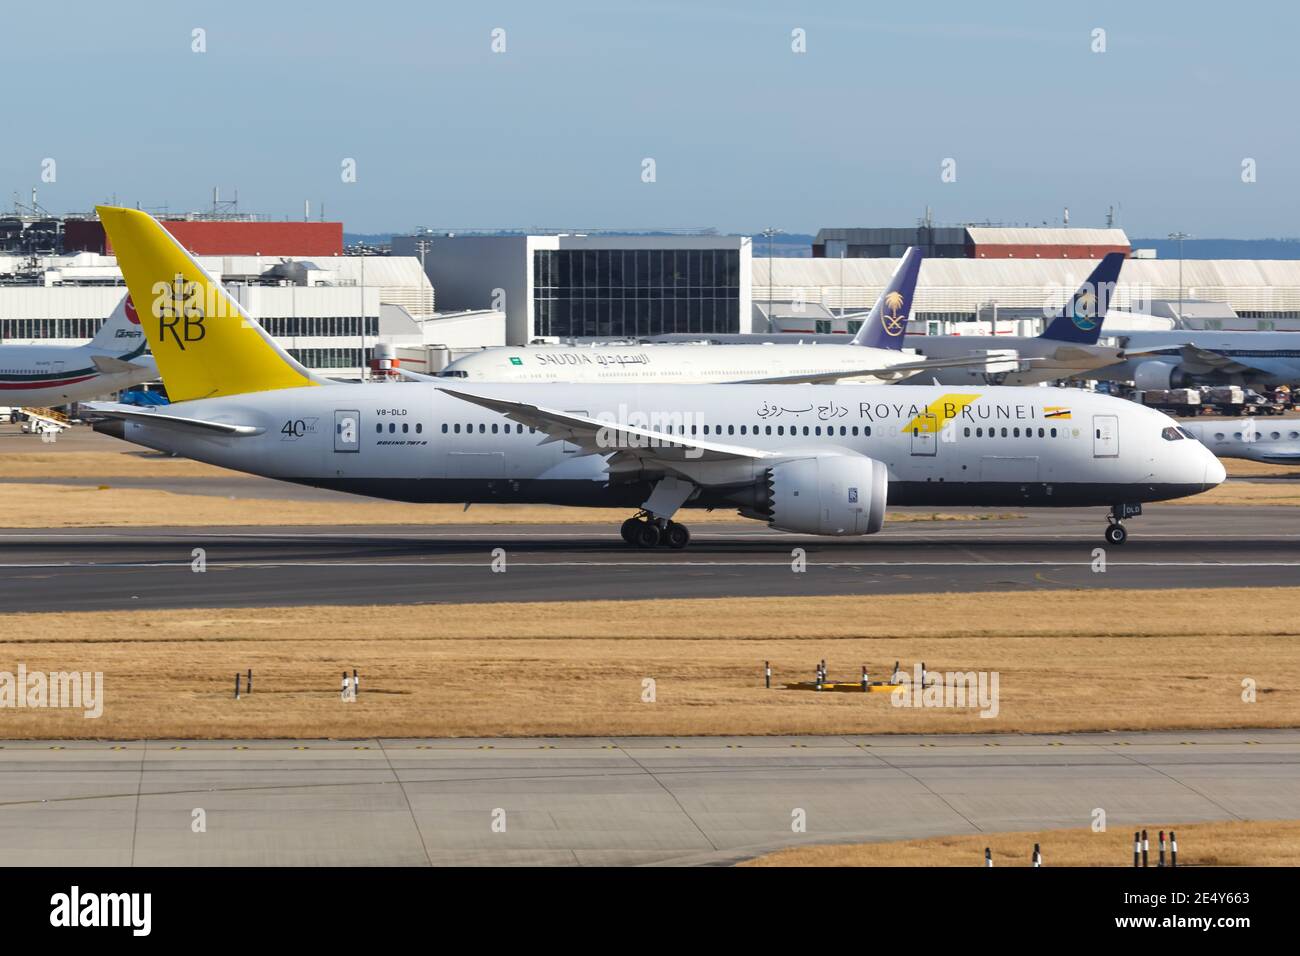 London, United Kingdom - August 1, 2018: Royal Brunei Boeing 787 Dreamliner airplane at London Heathrow airport (LHR) in the United Kingdom. Stock Photo